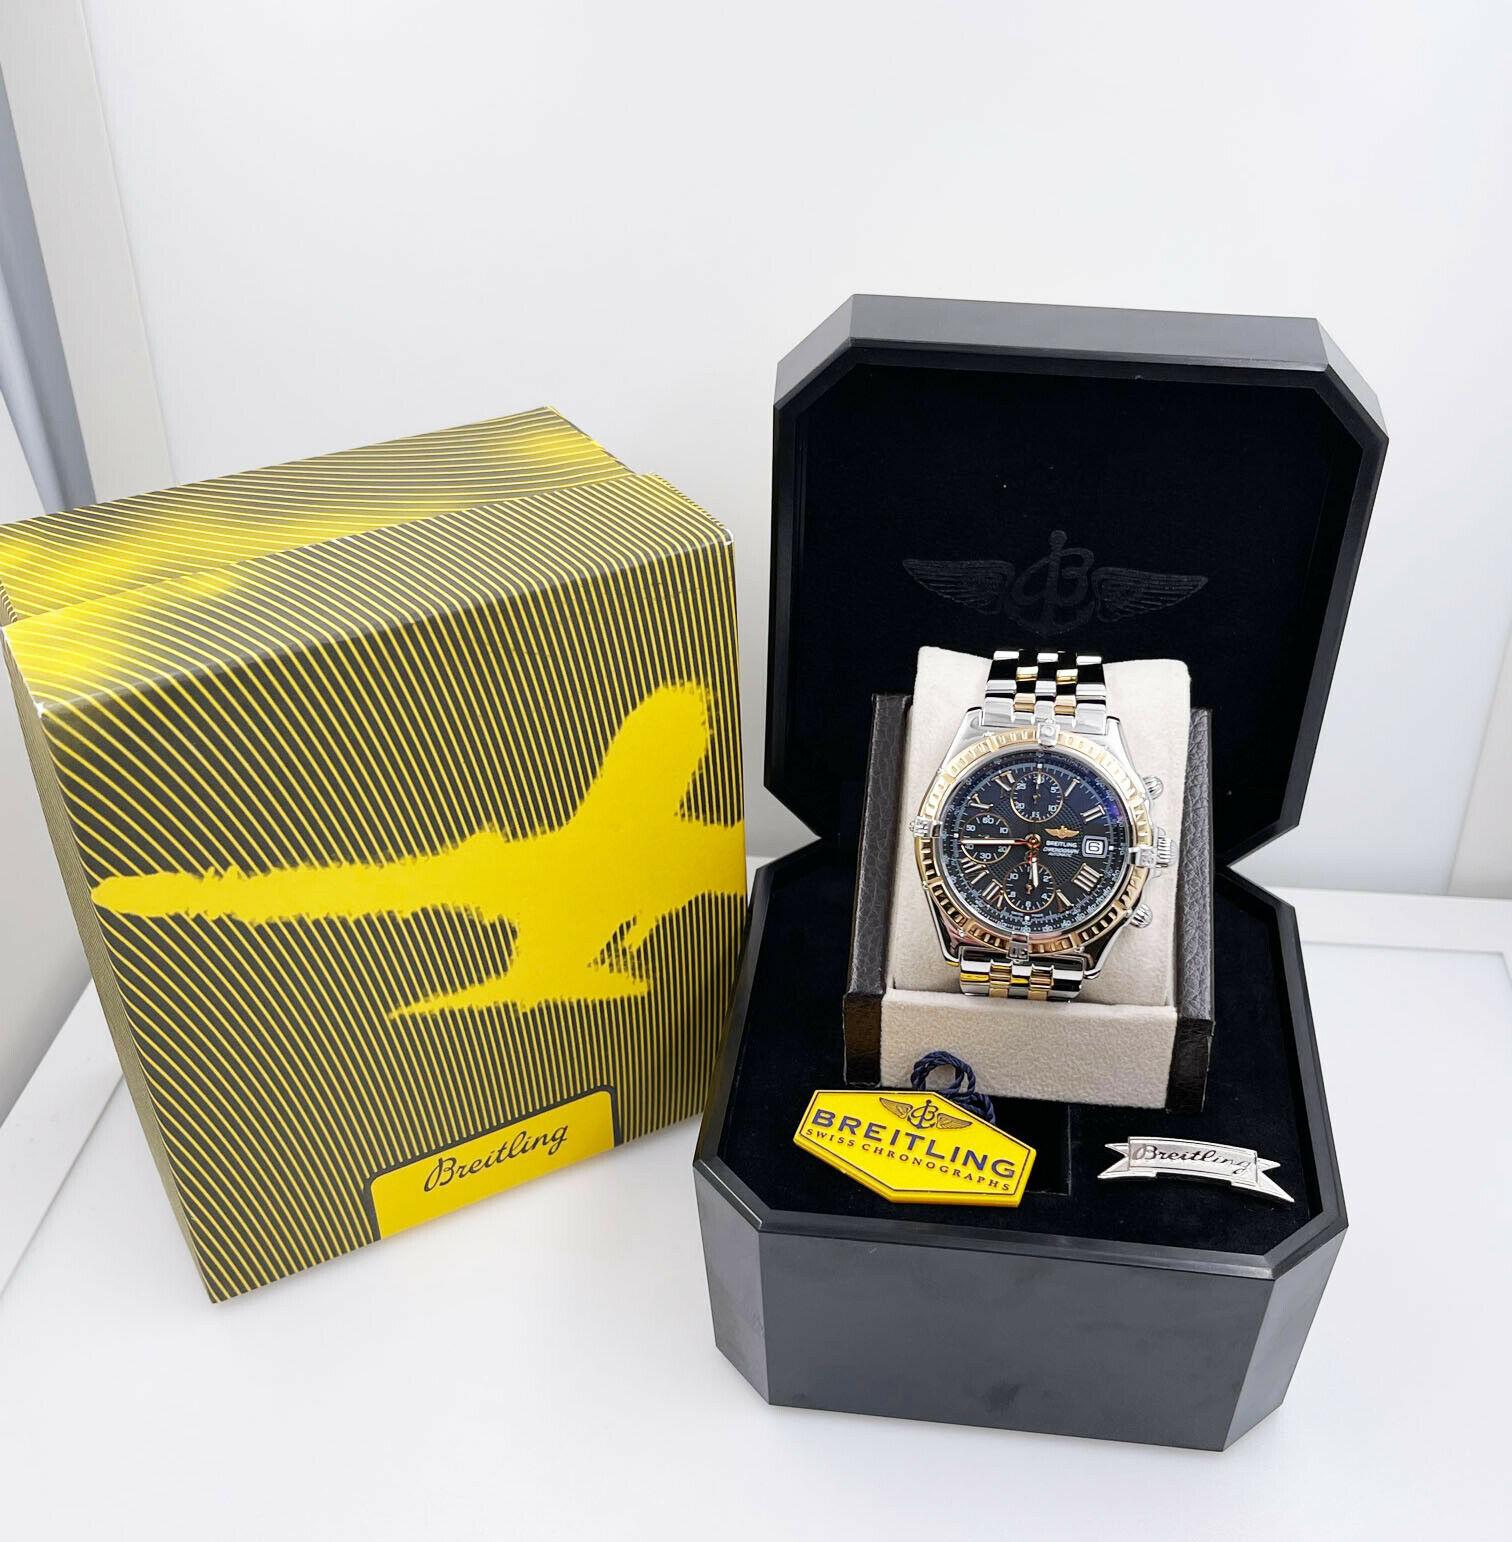 Breitling D13055 Crosswind 18K Yellow Gold Stainless Steel with Box 1